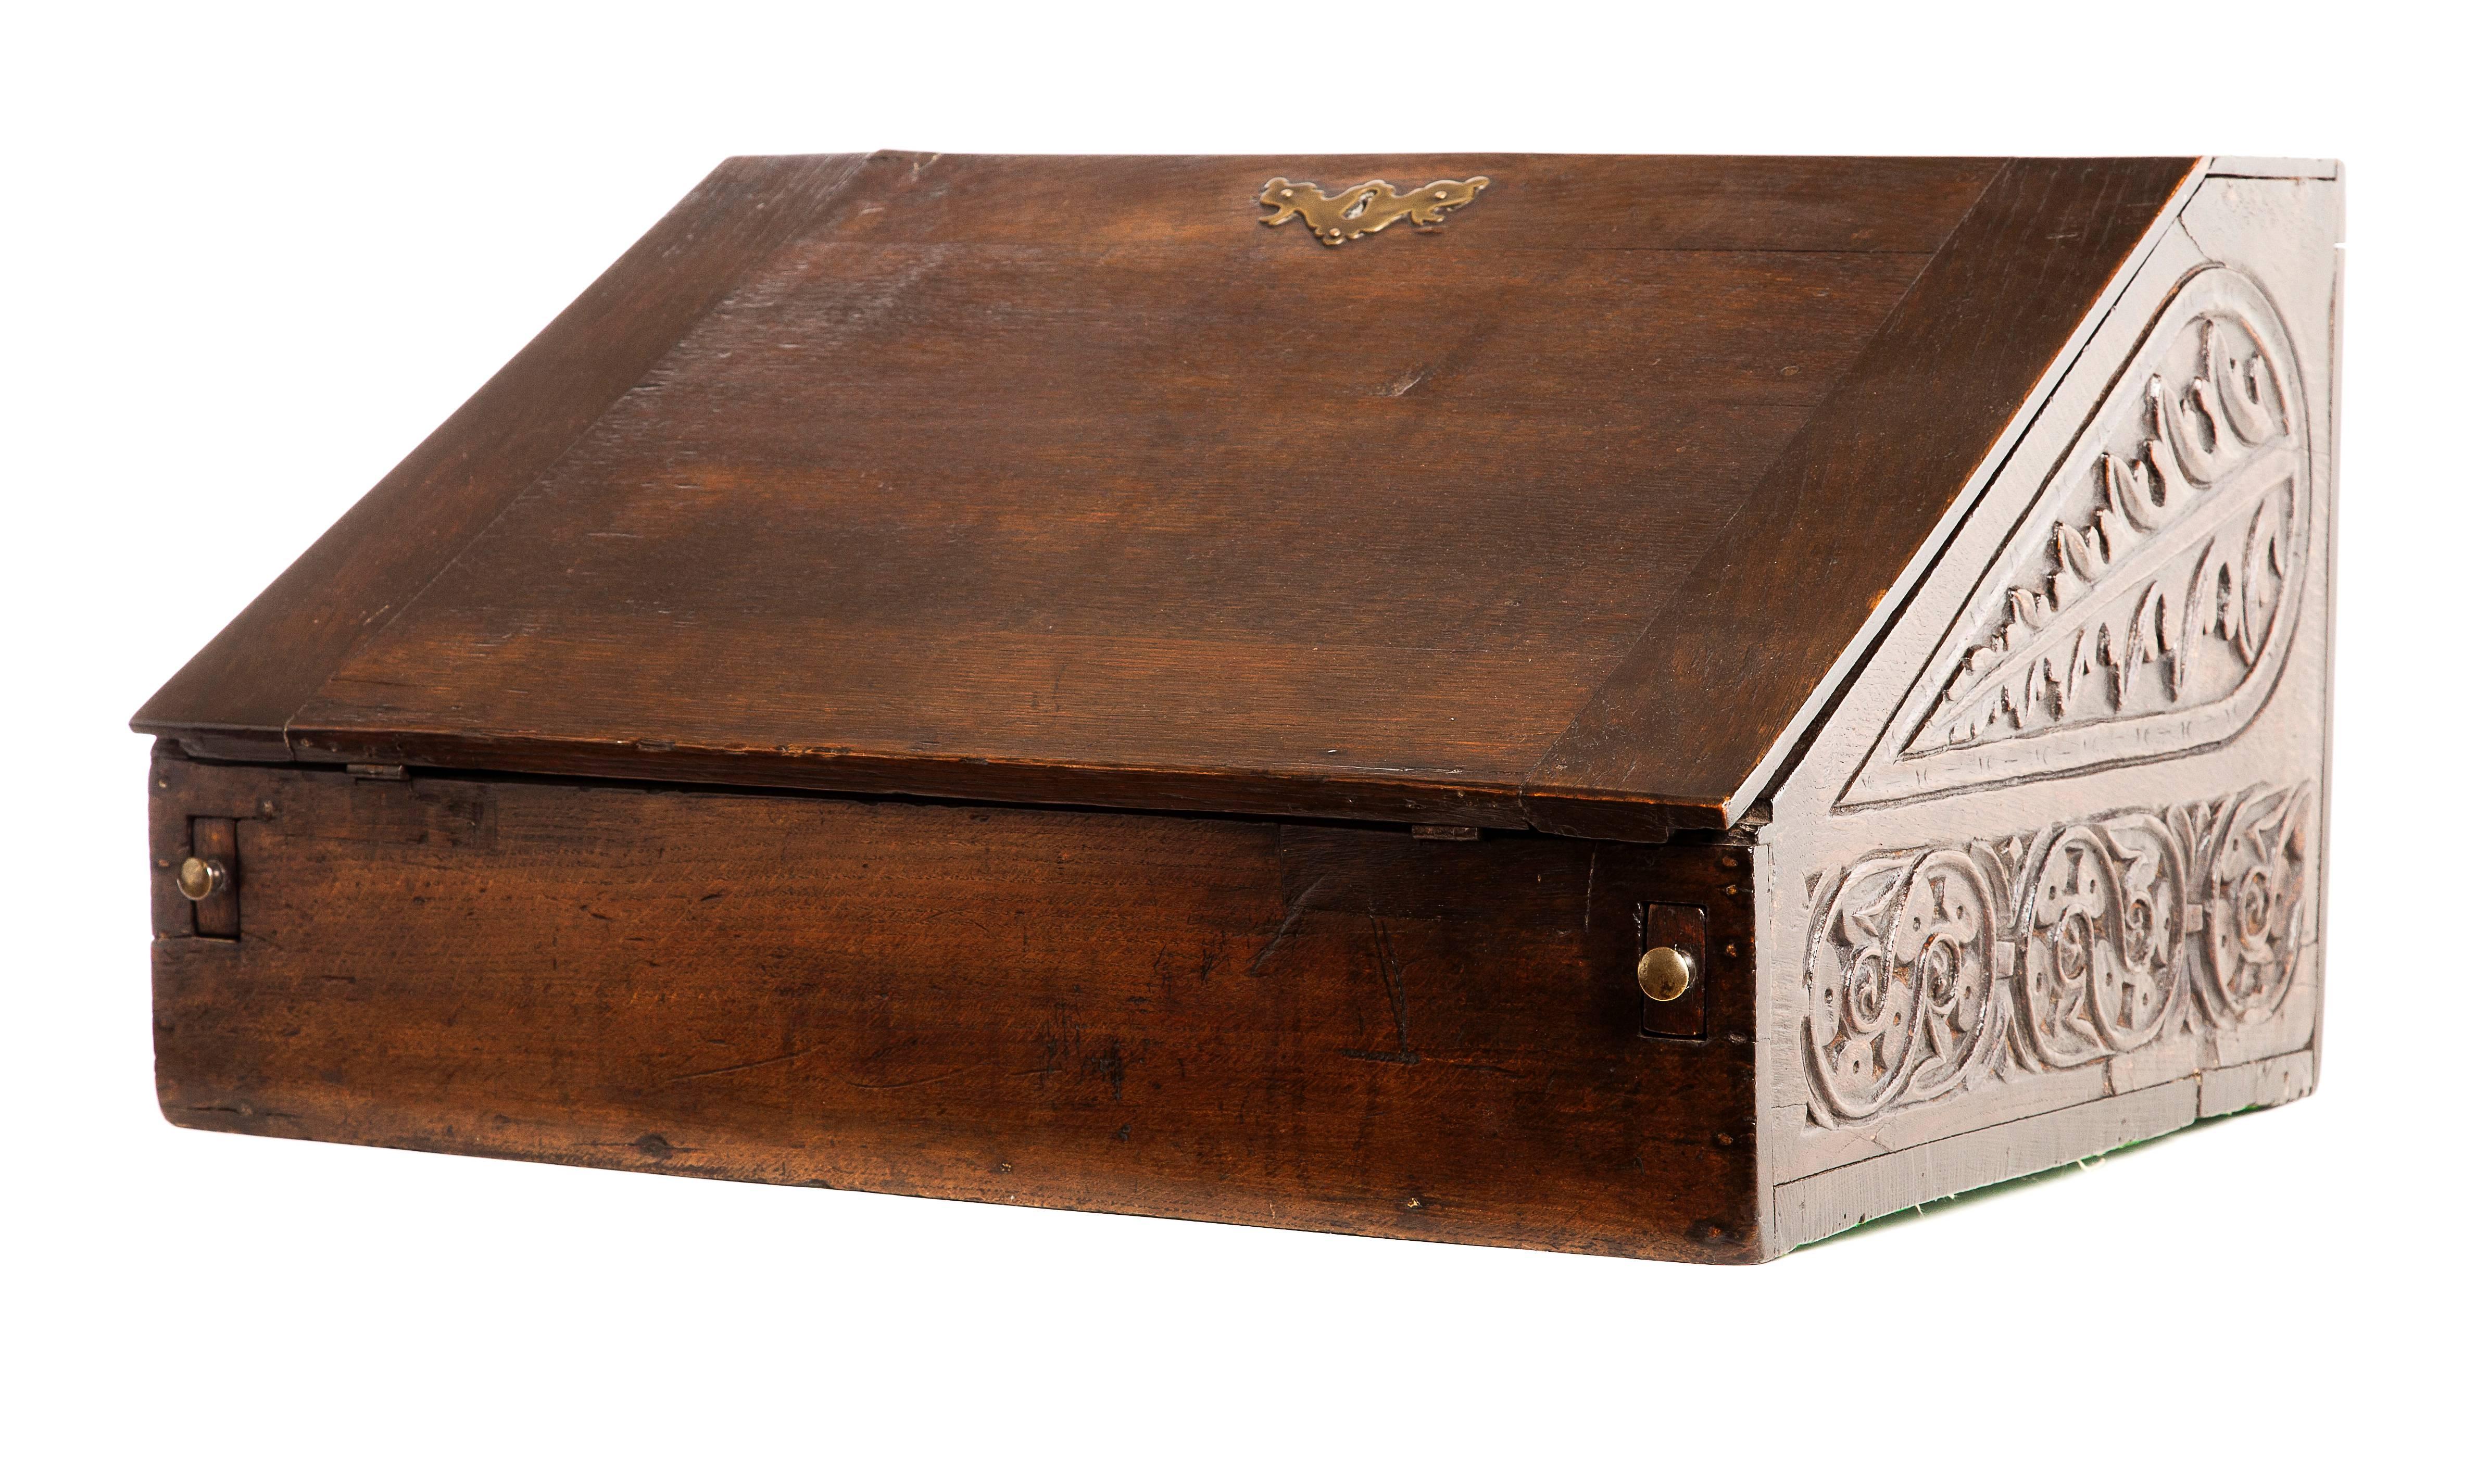 19th century English writing slope. Walnut with carved sides, five interior drawers and brass lock and pulls.